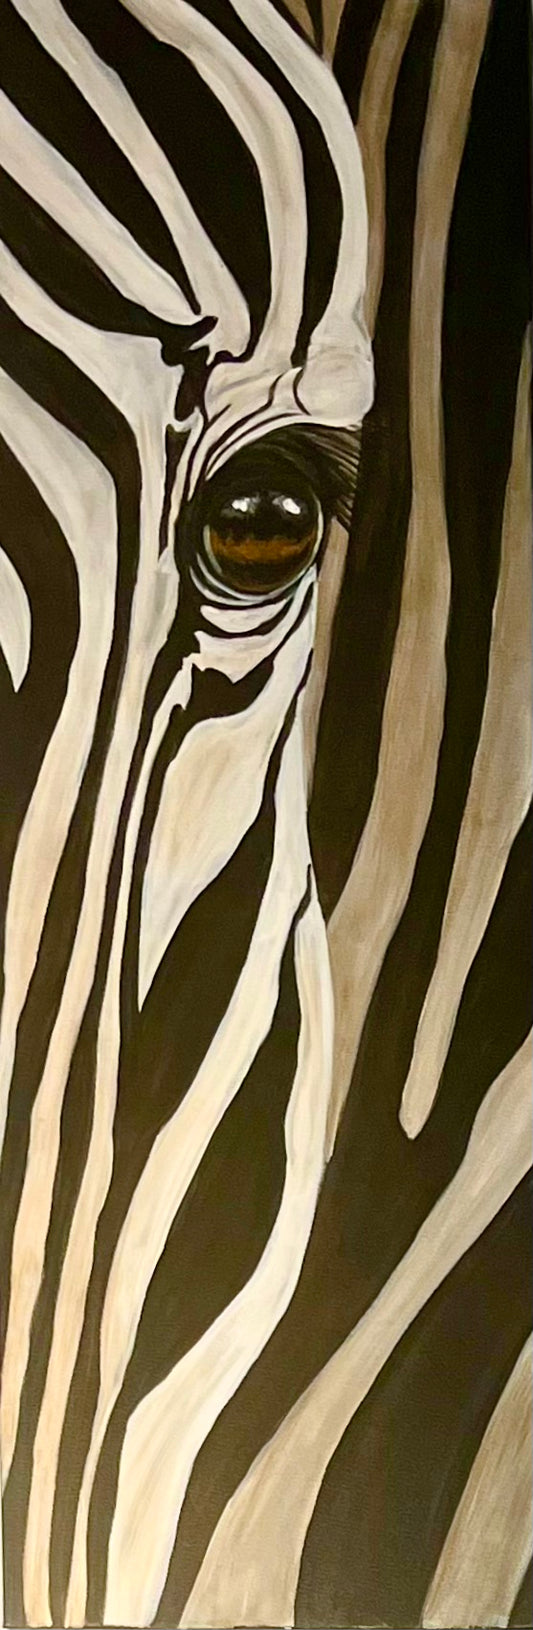 36” by 12” acrylic on gallery wrapped canvas with a front view of a zebra's eye. Original by Terrinye